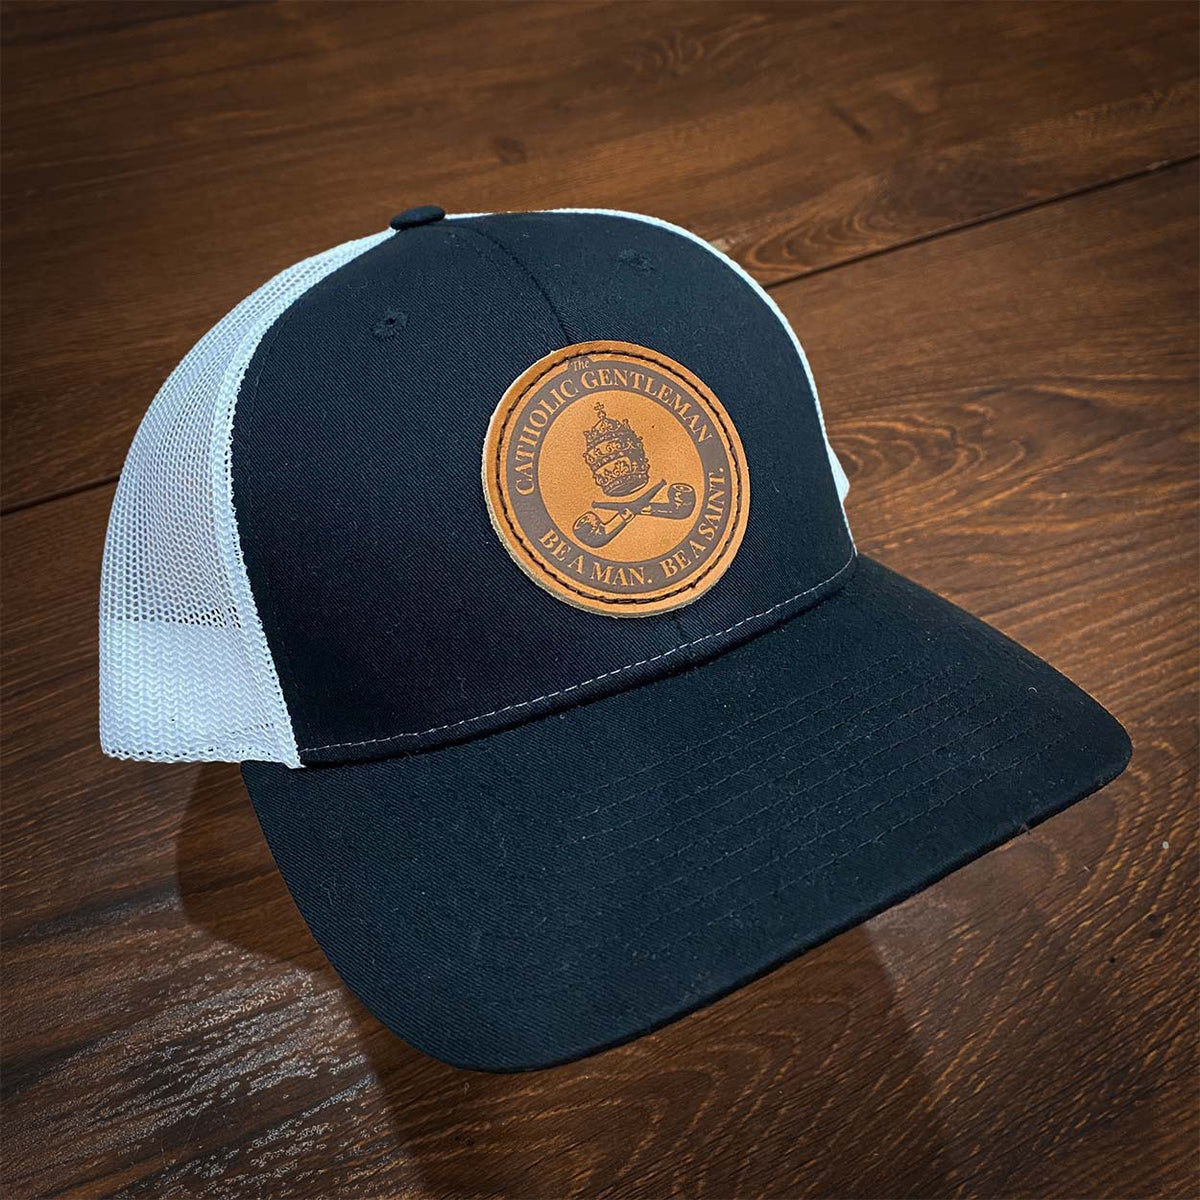 Leather Patch Hat - Black/White – The Catholic Gentleman Store